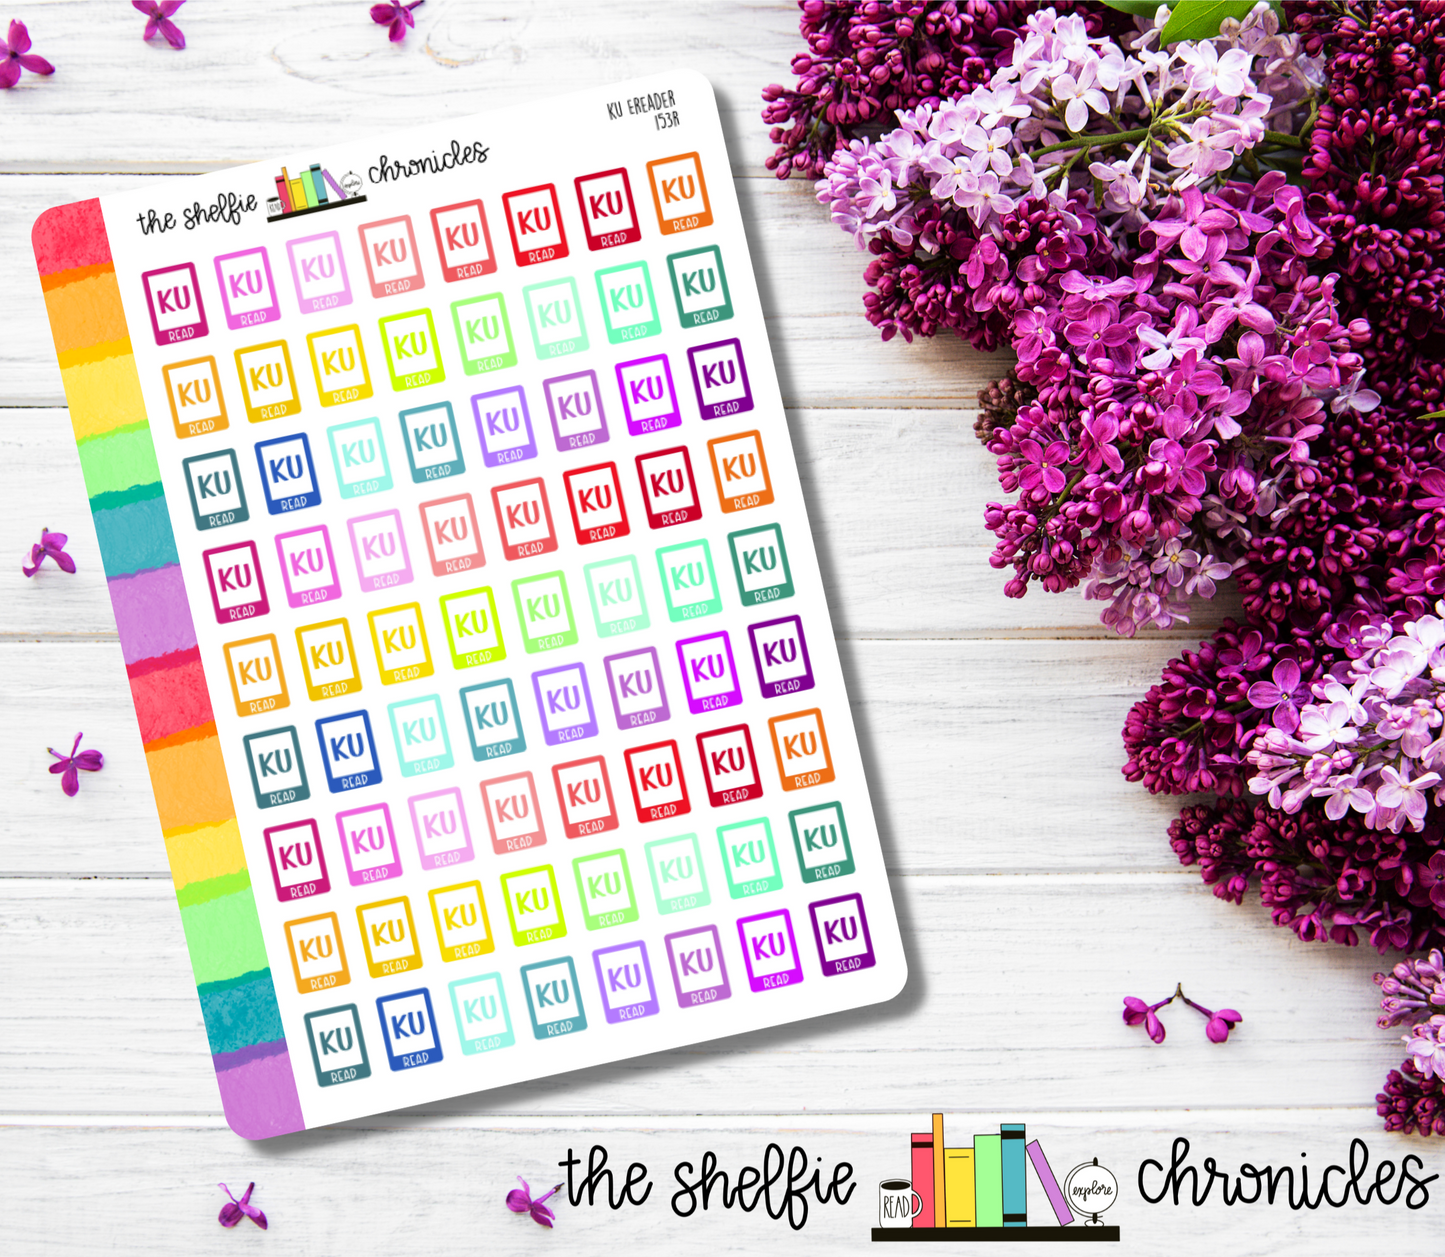 153 - KU Ereader - Choose Your Color - Die Cut Stickers - Repositionable Paper